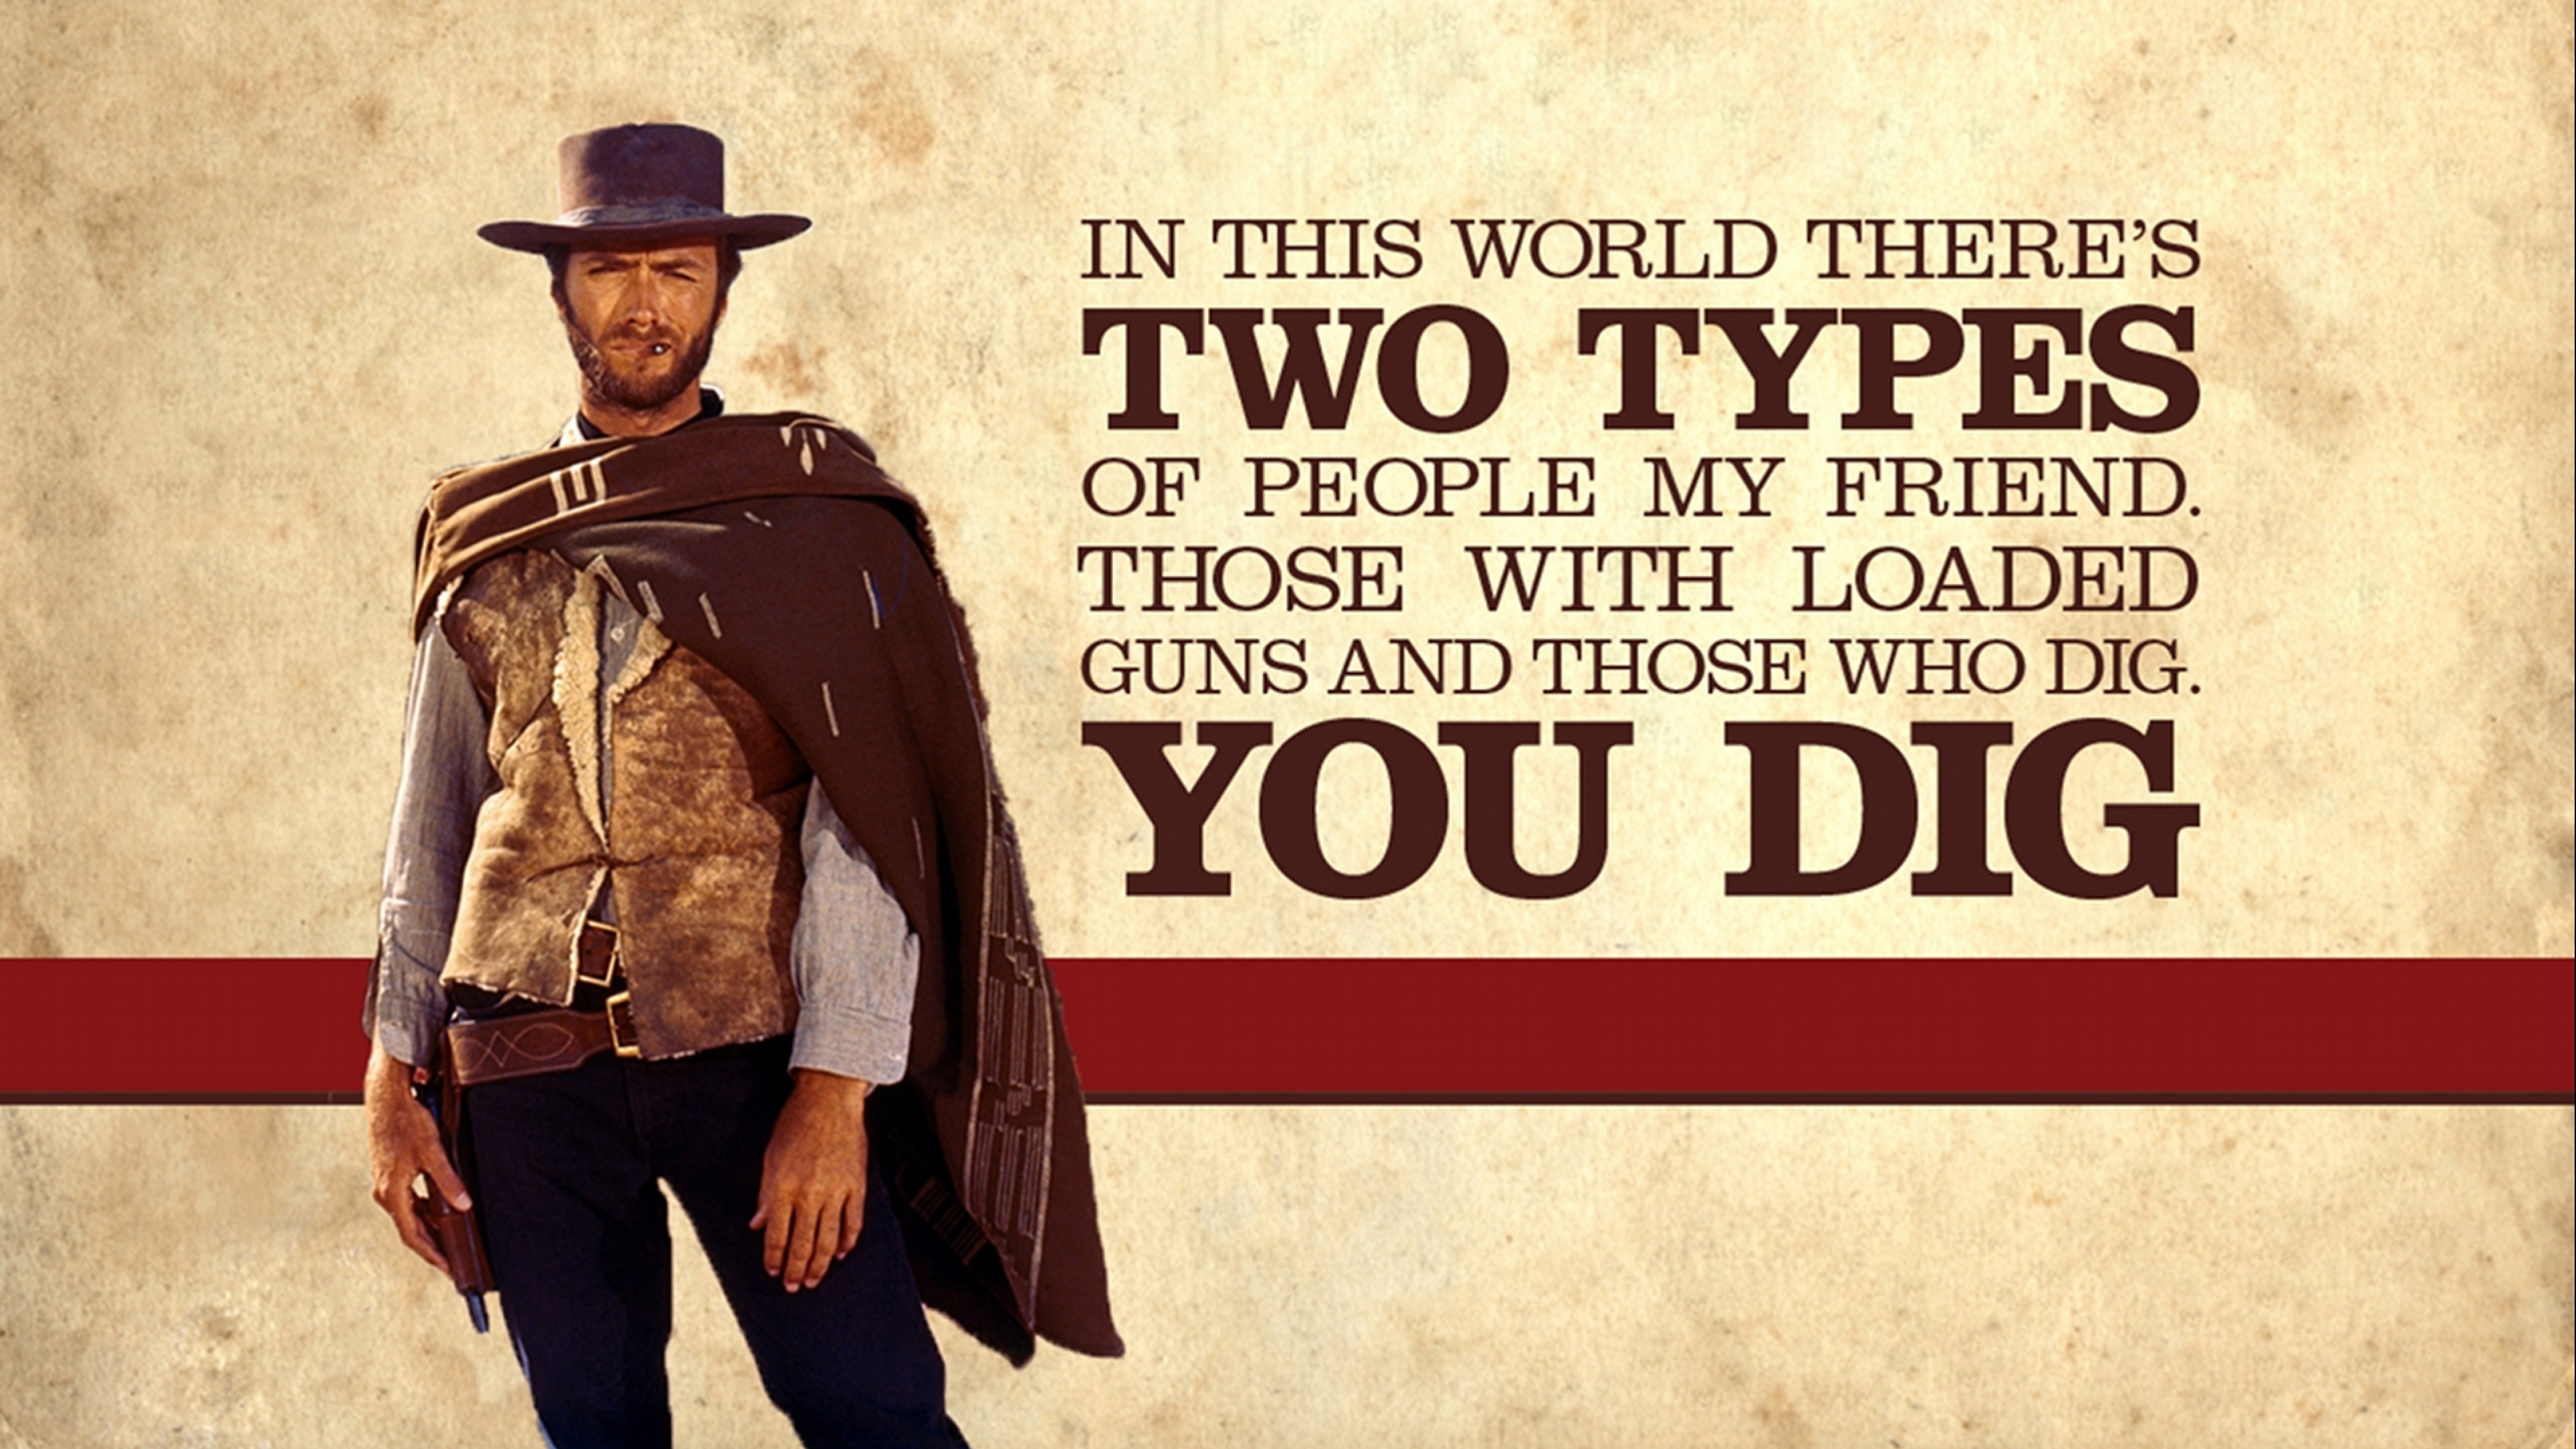 The Good, The Bad and the Ugly, Clint Eastwood, Western Wallpaper